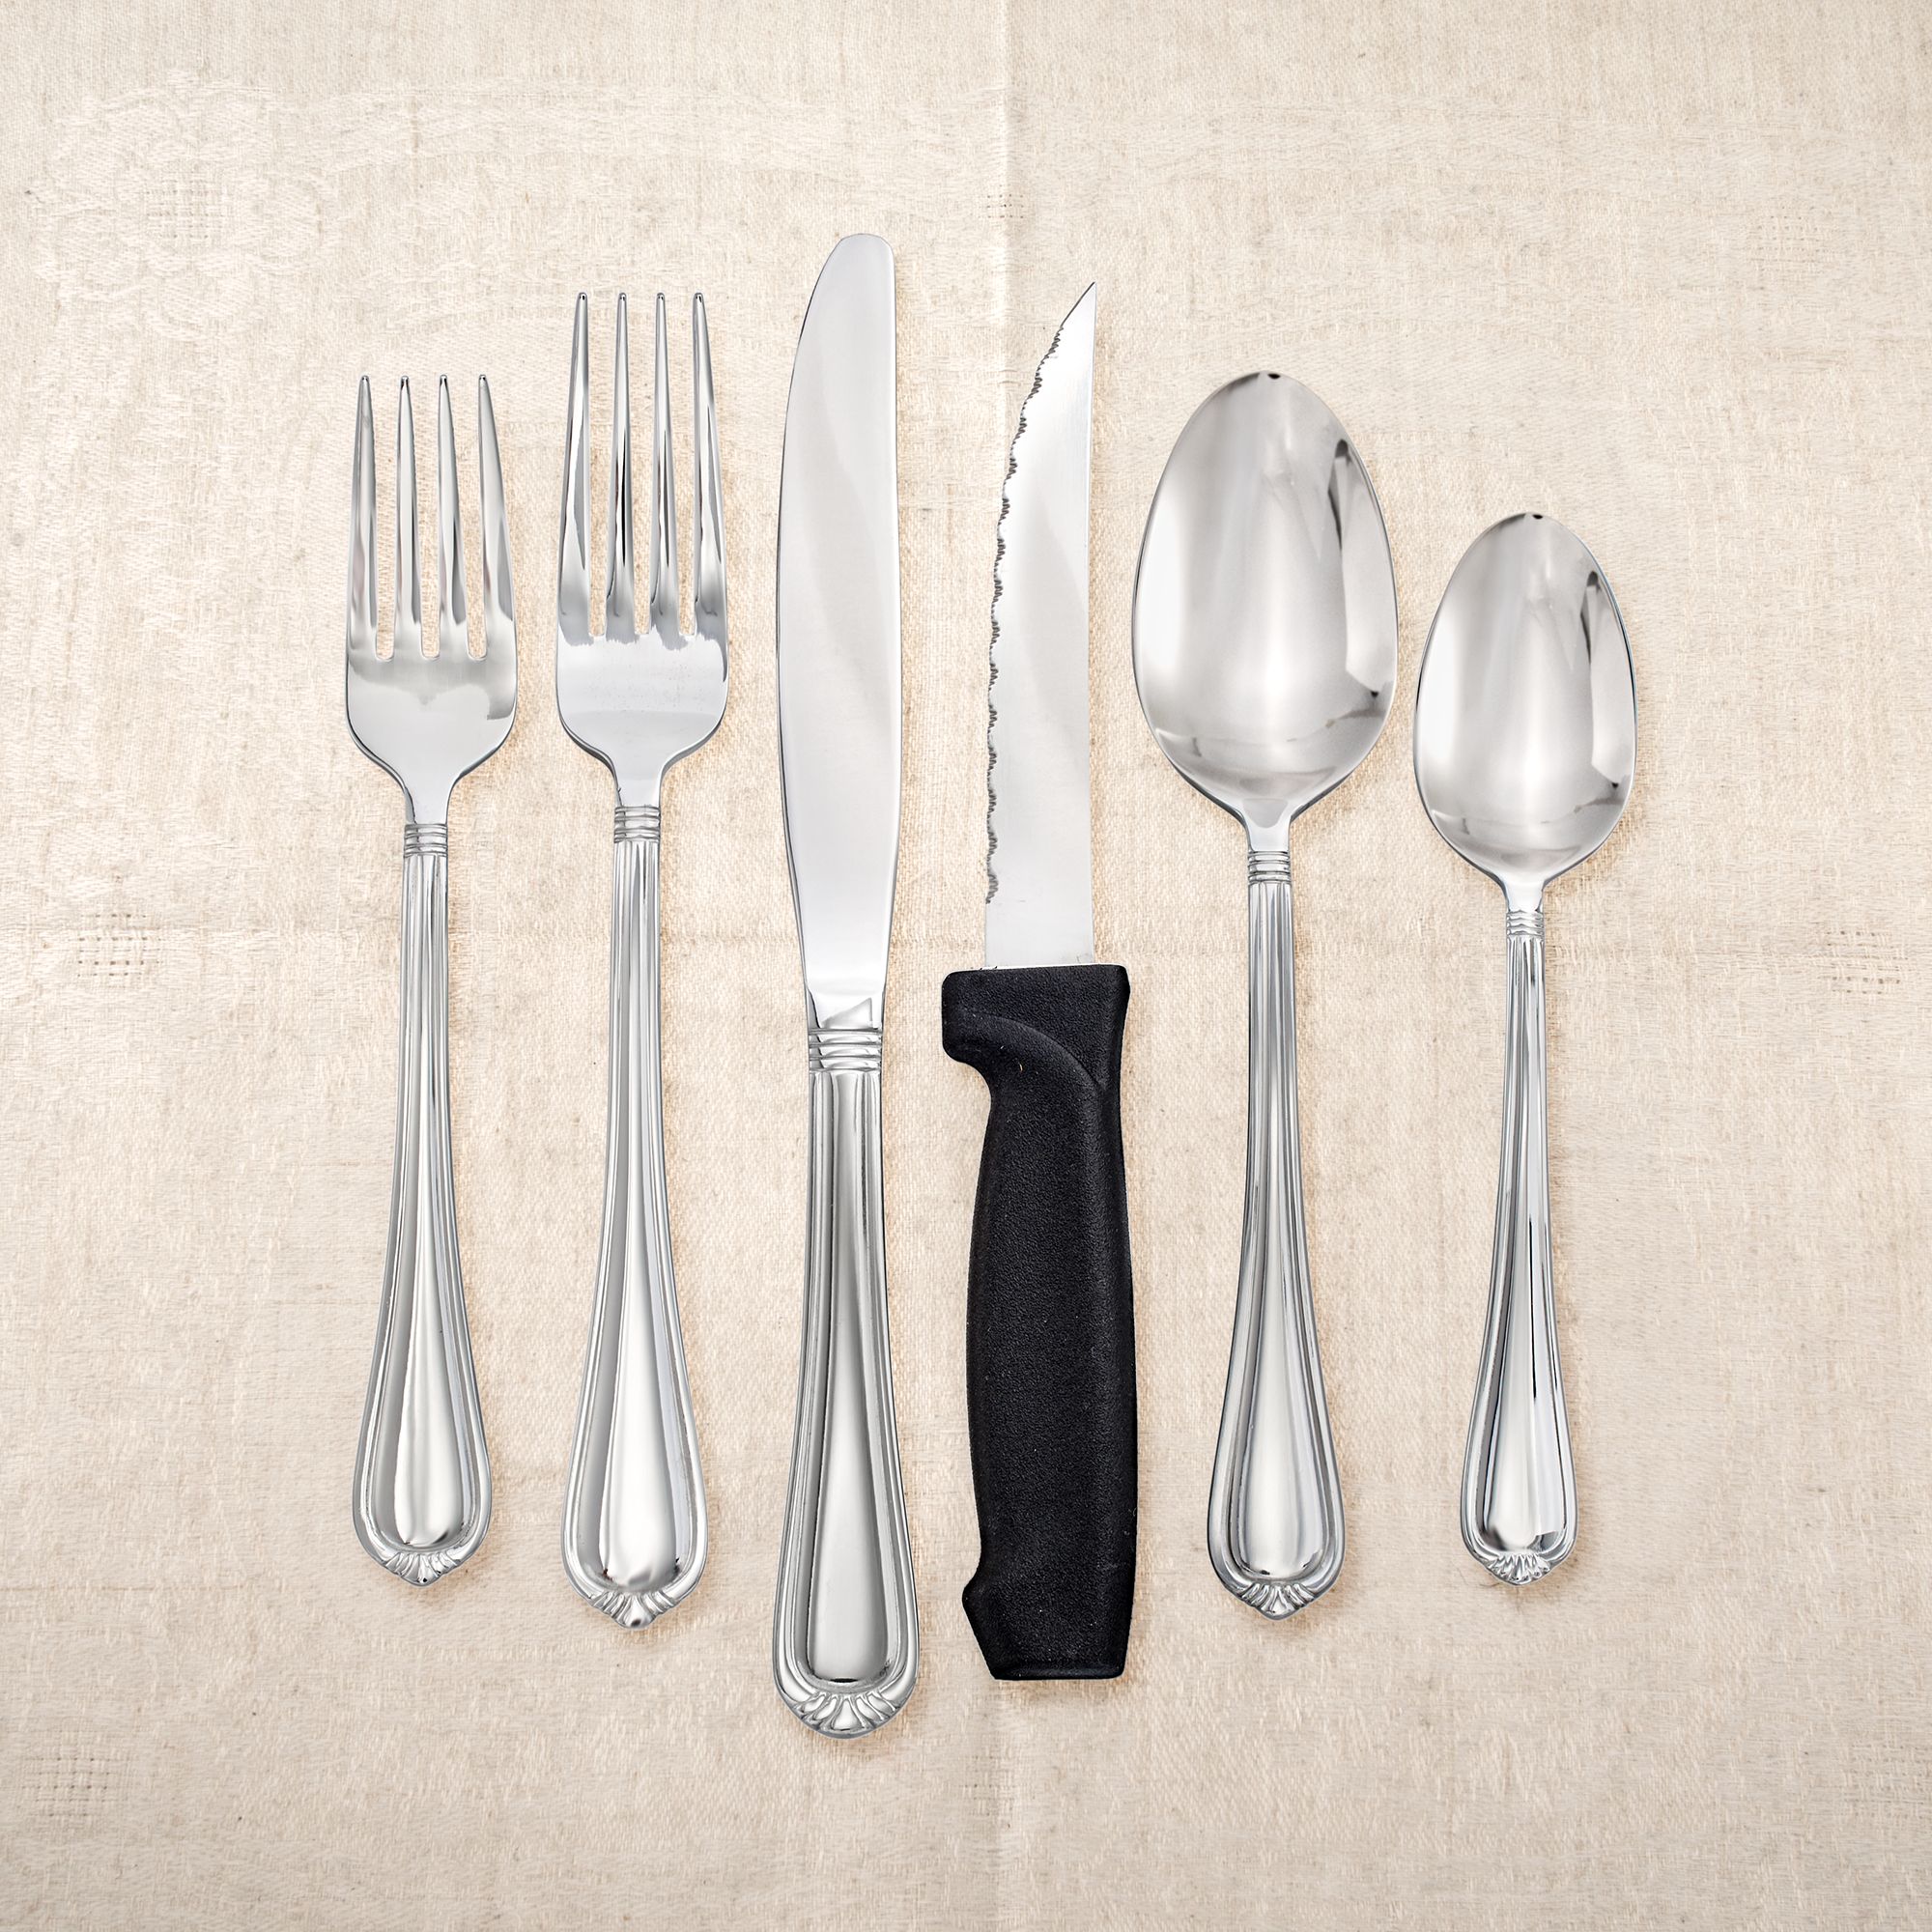 International Silver "Nouveau" 18/0 Stainless Steel Flatware | Ross-Simons 18 0 Stainless Steel Silverware